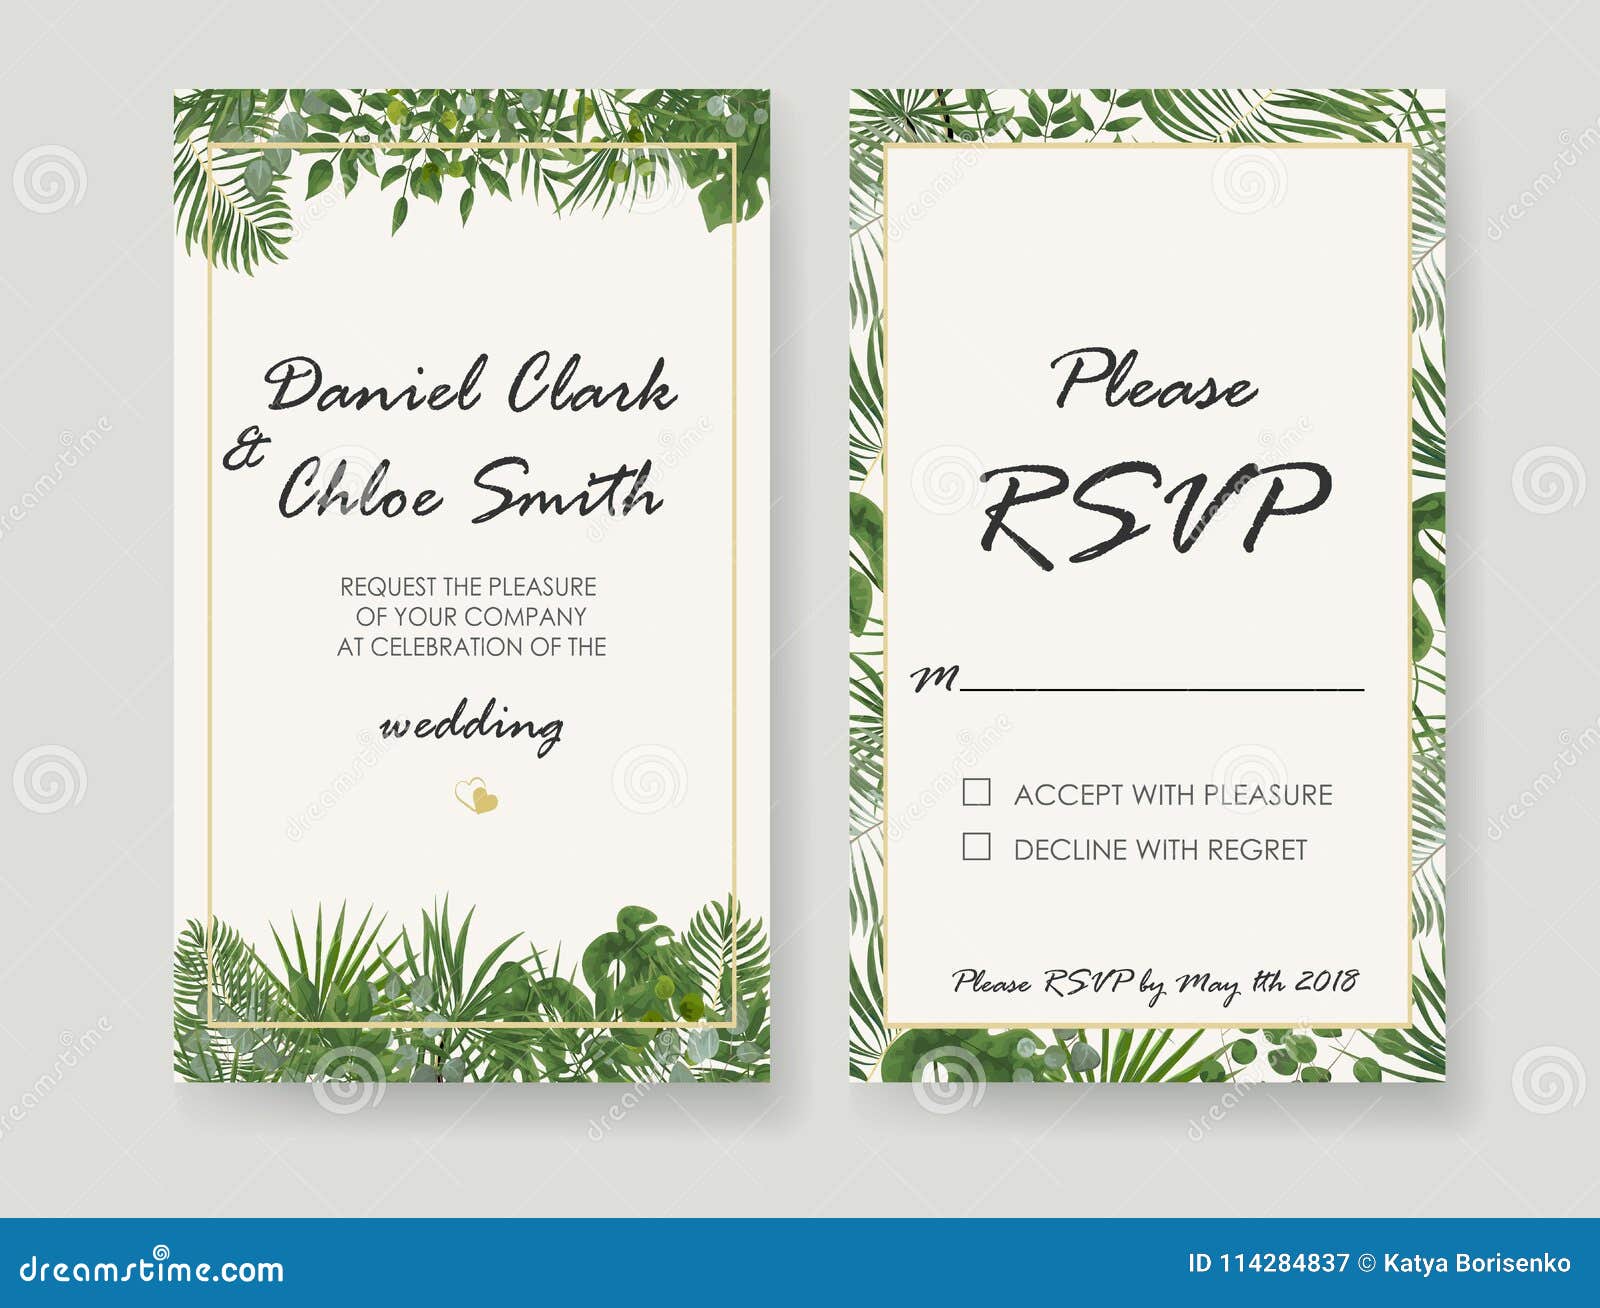 Rsvp How to